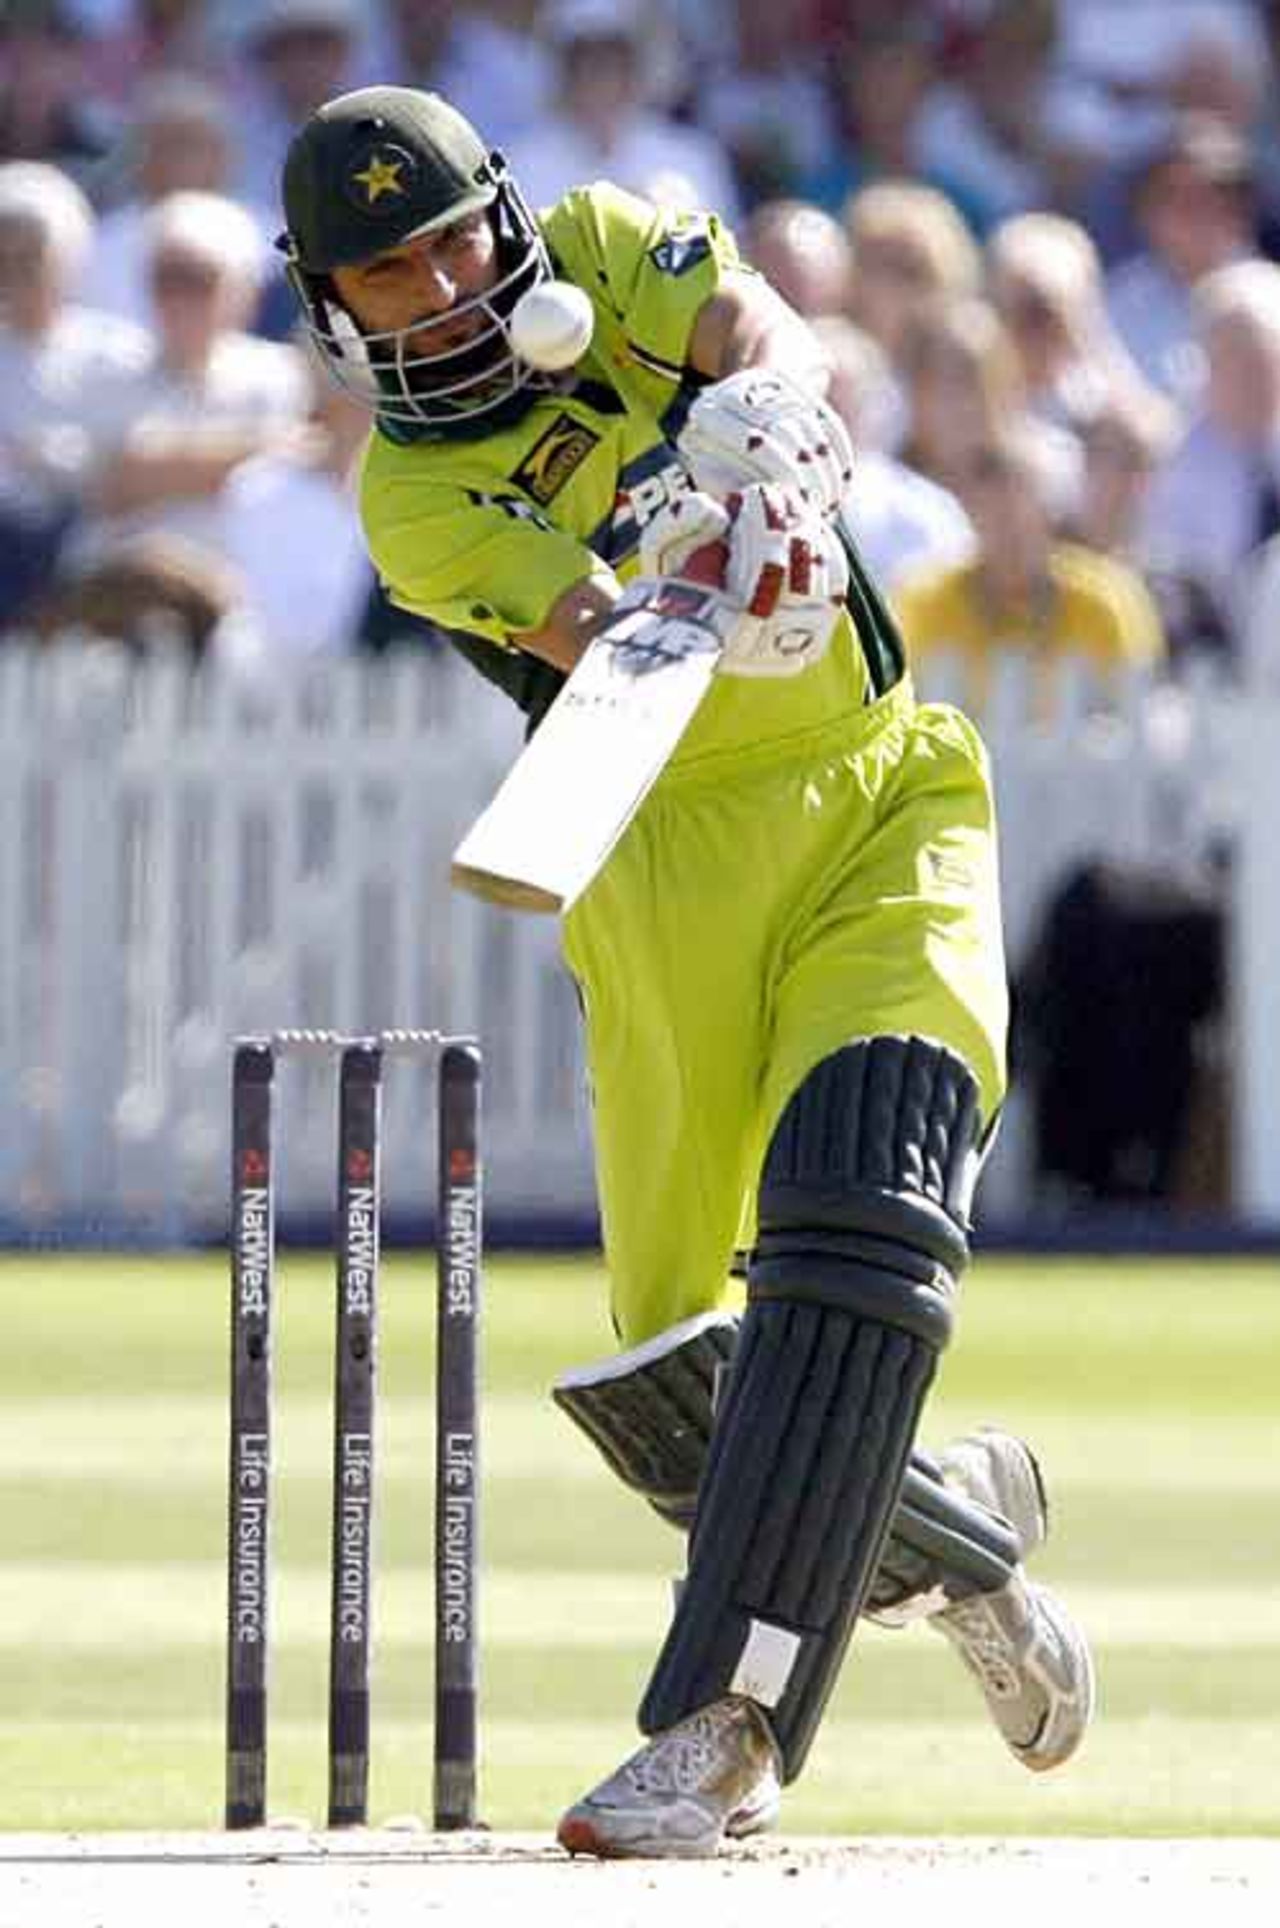 Shahid Afridi launches a six to open his account, England v Pakistan, 4th ODI, Trent Bridge, September 8, 2006